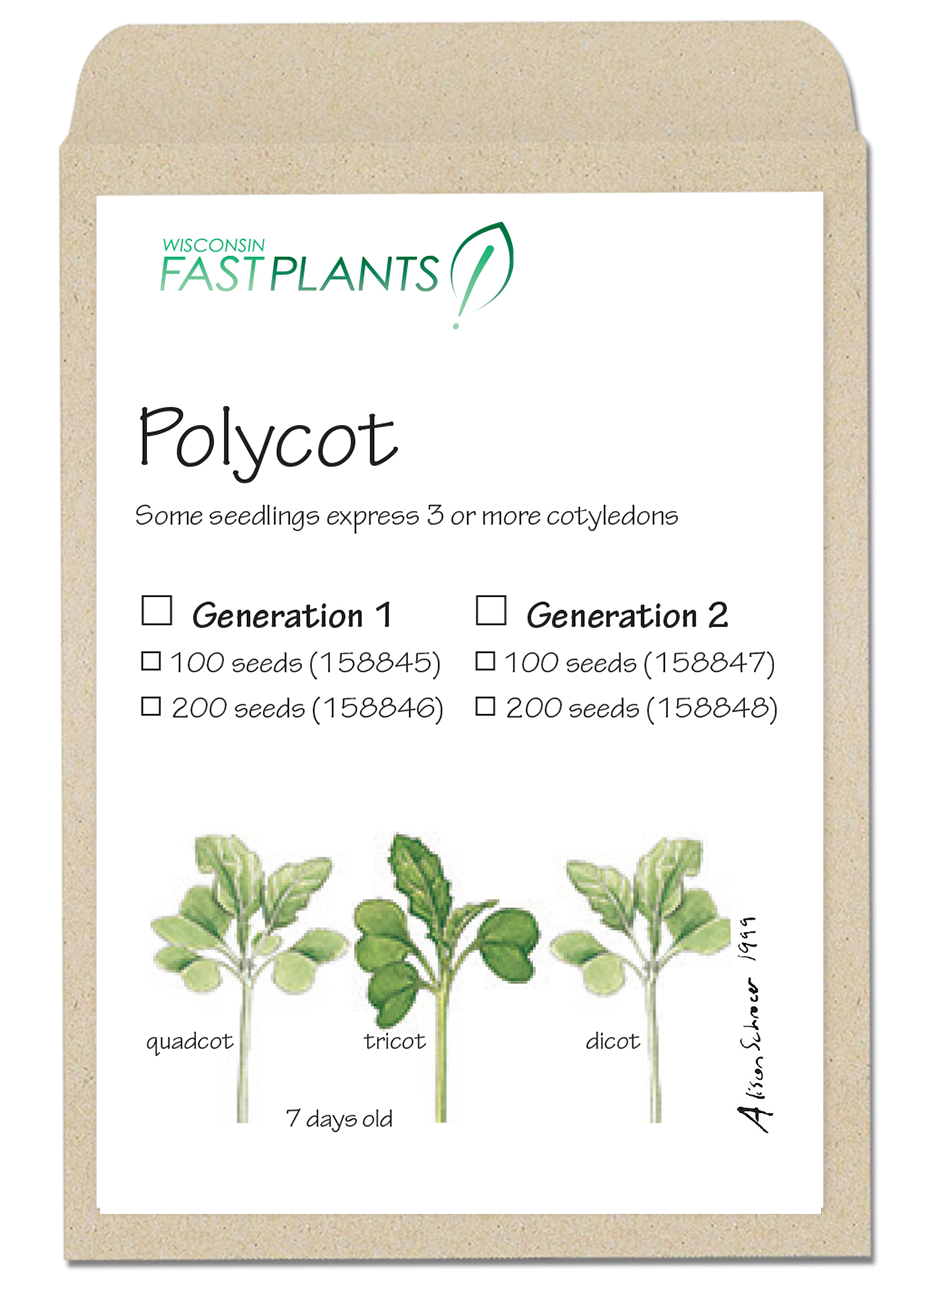 Polycots seed envelope image